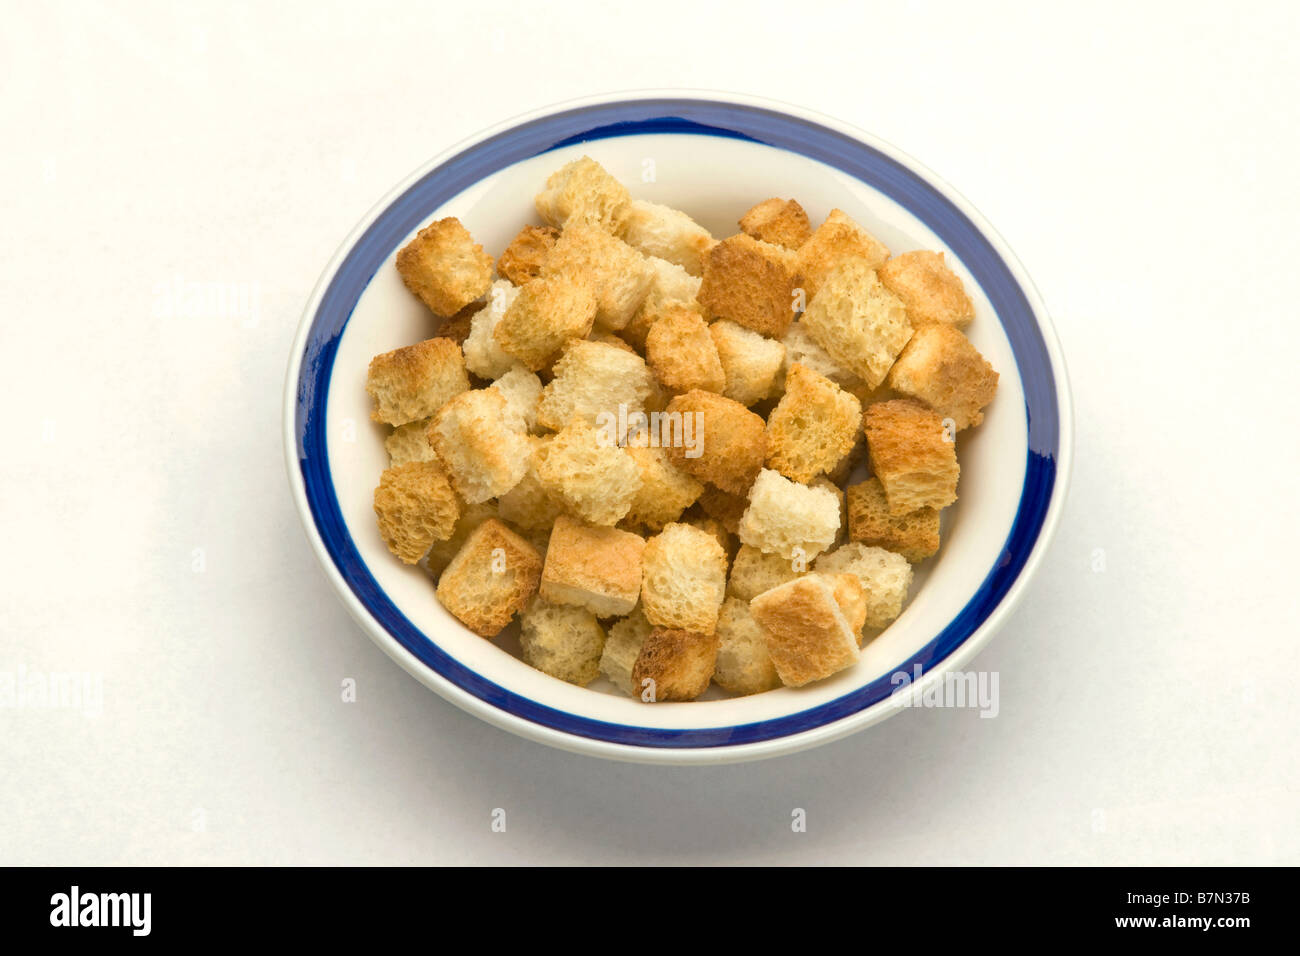 bowl of crutons Stock Photo